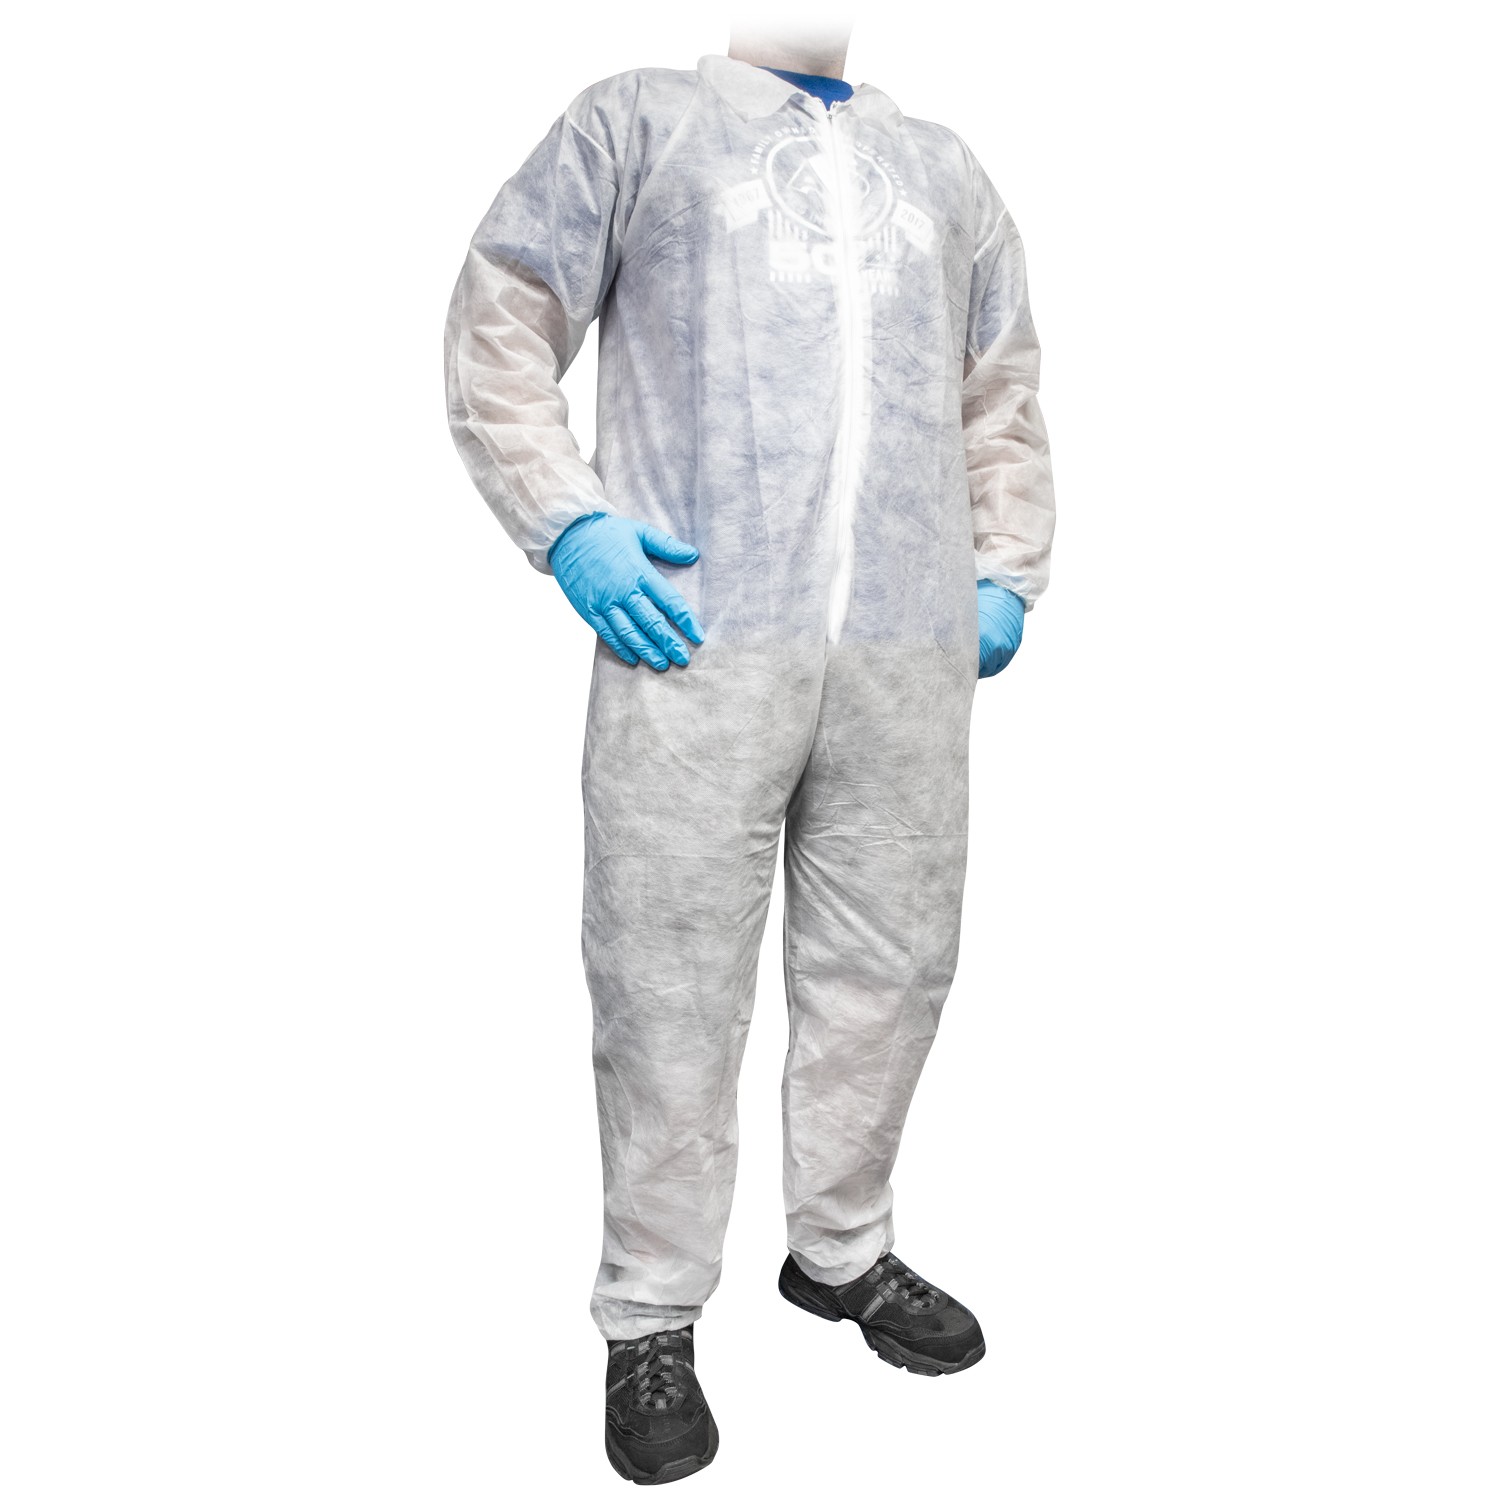 Coveralls - 3X Large